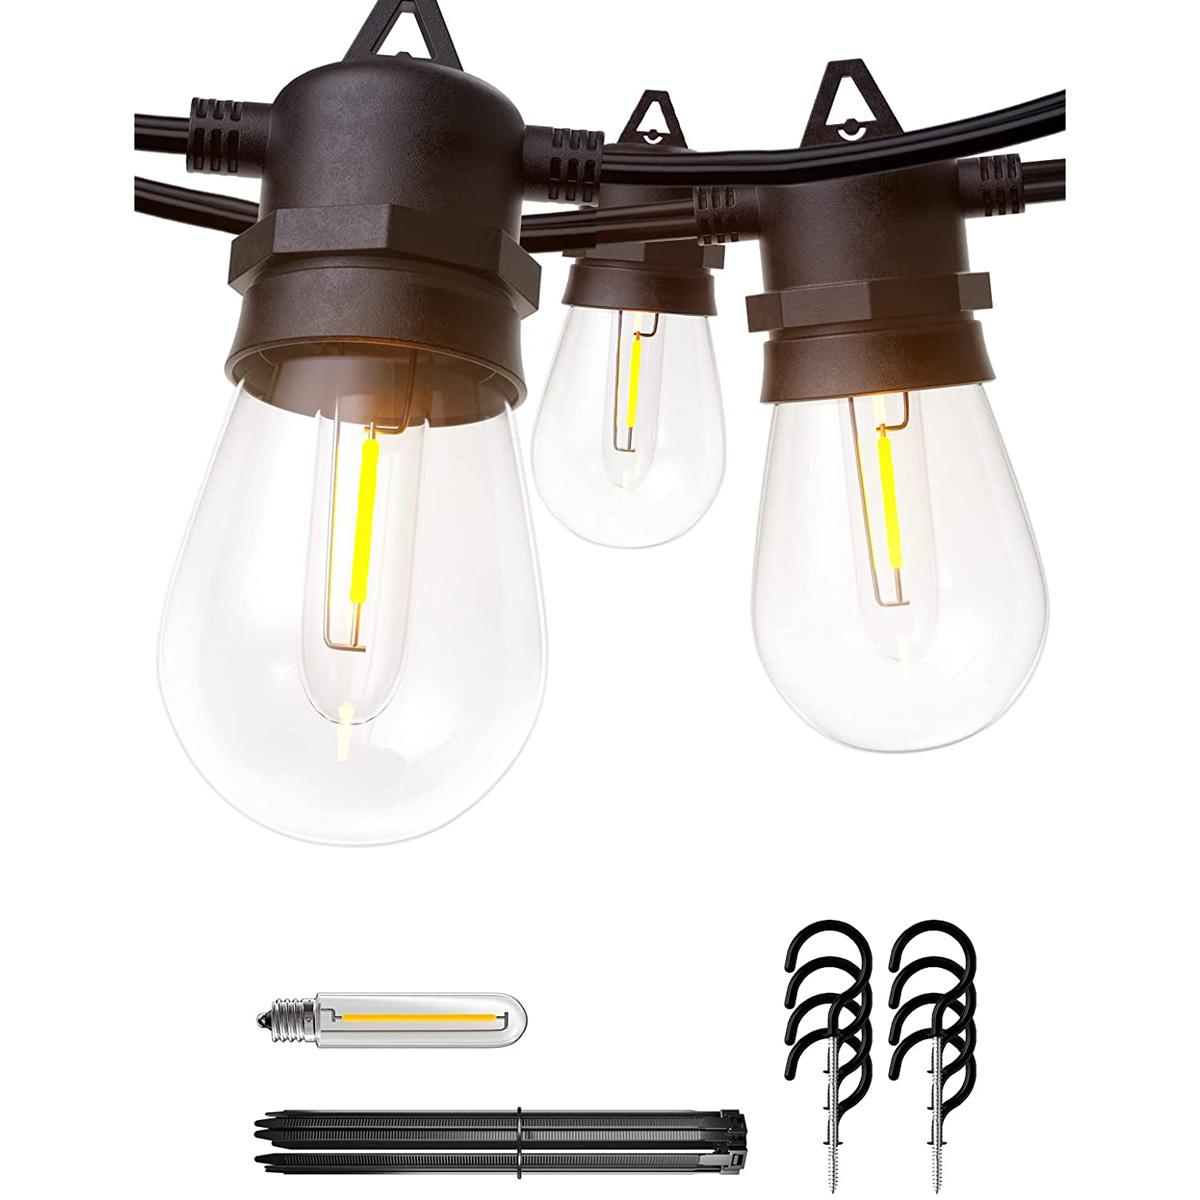 50ft LED Outdoor String Lights with Dimmable Edison Bulbs for $23.99 Shipped